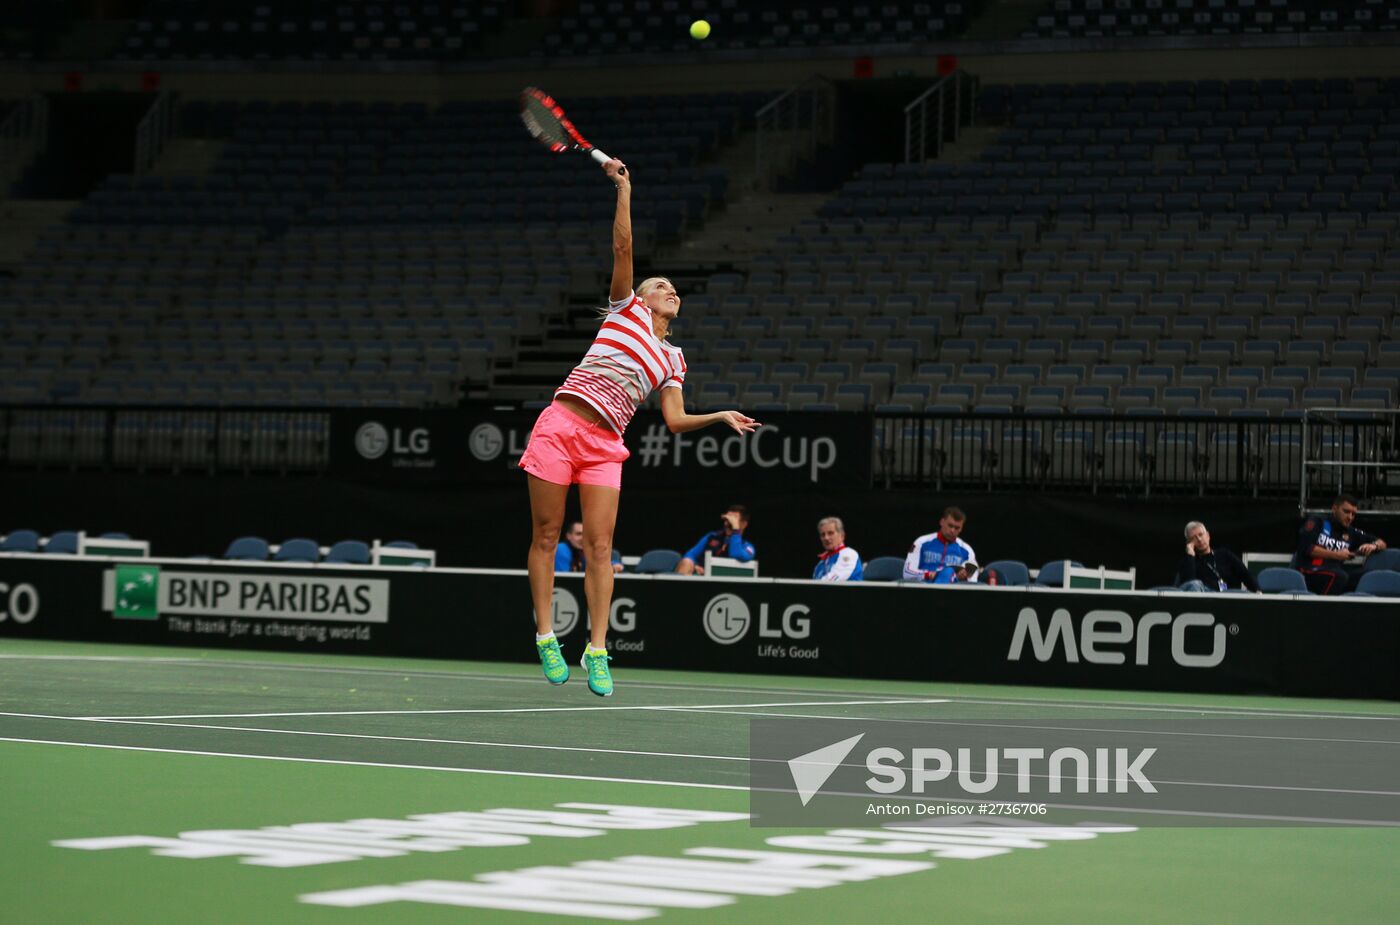 Fed Cup. Finals. Russian team holds training session